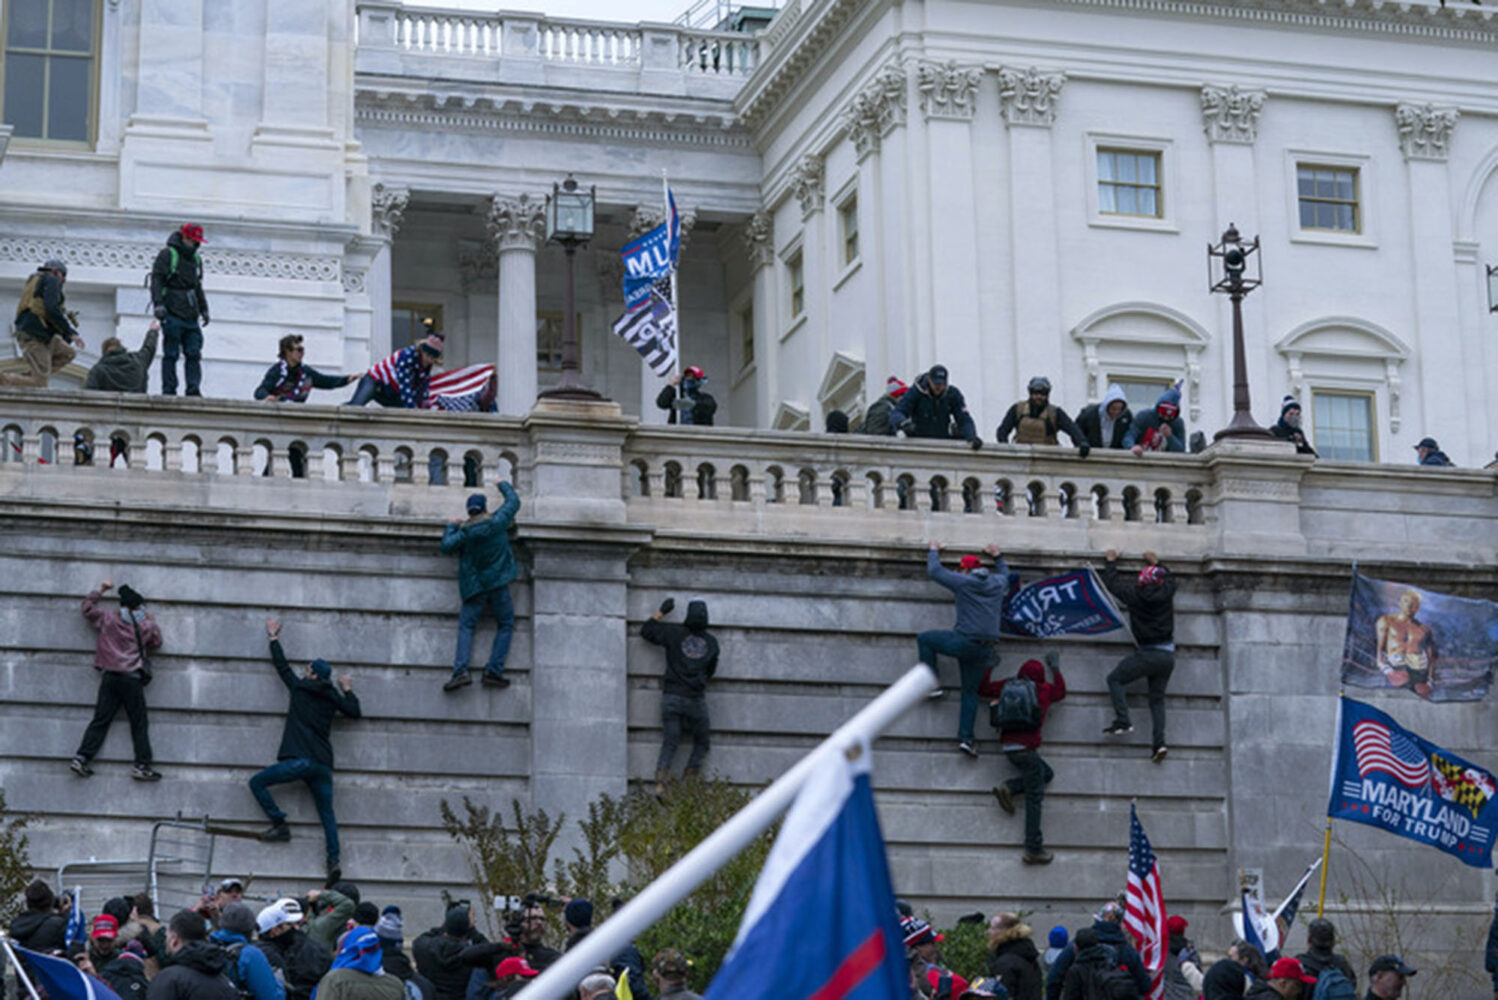 Photo: A photo from January 6th, with people attempting to climb the walls of the Capitol building.